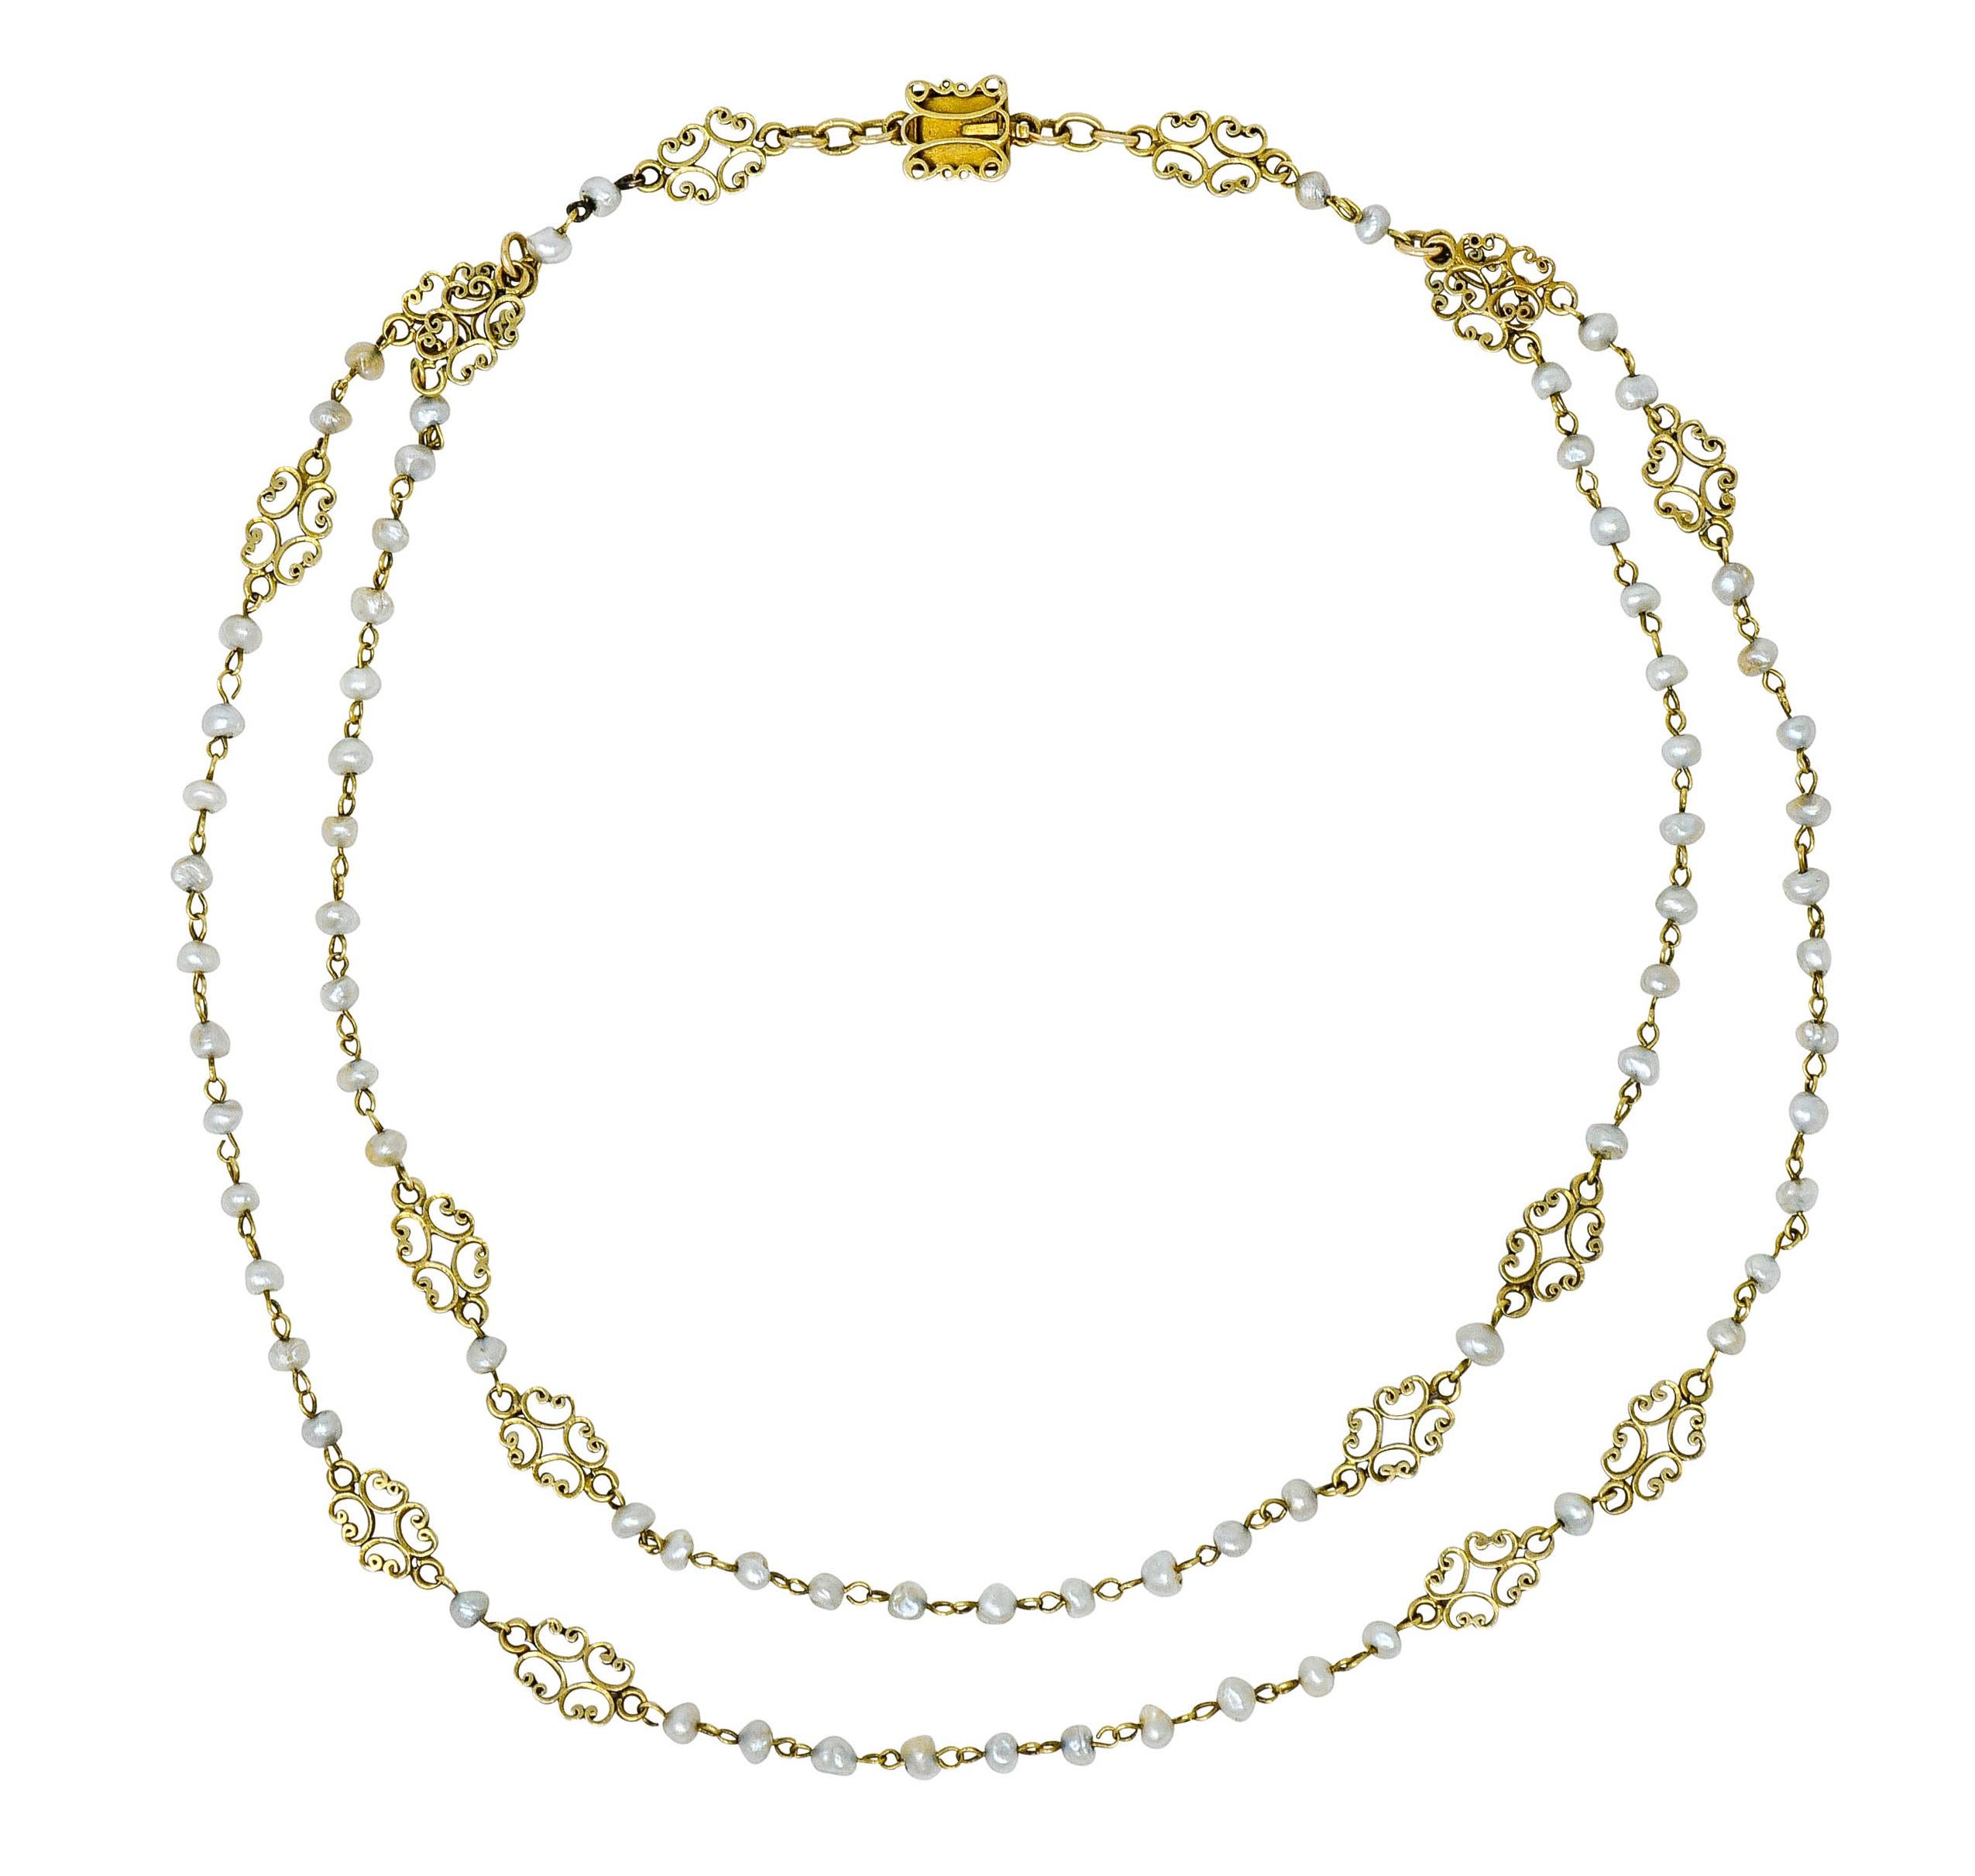 Necklace features two strands of pigtailed freshwater natural pearls measuring approximately 3.5 mm to 4.0 mm

Well-matched with cream body color and strong silvery overtones, good to very good luster

Accented throughout by scrolled filigree